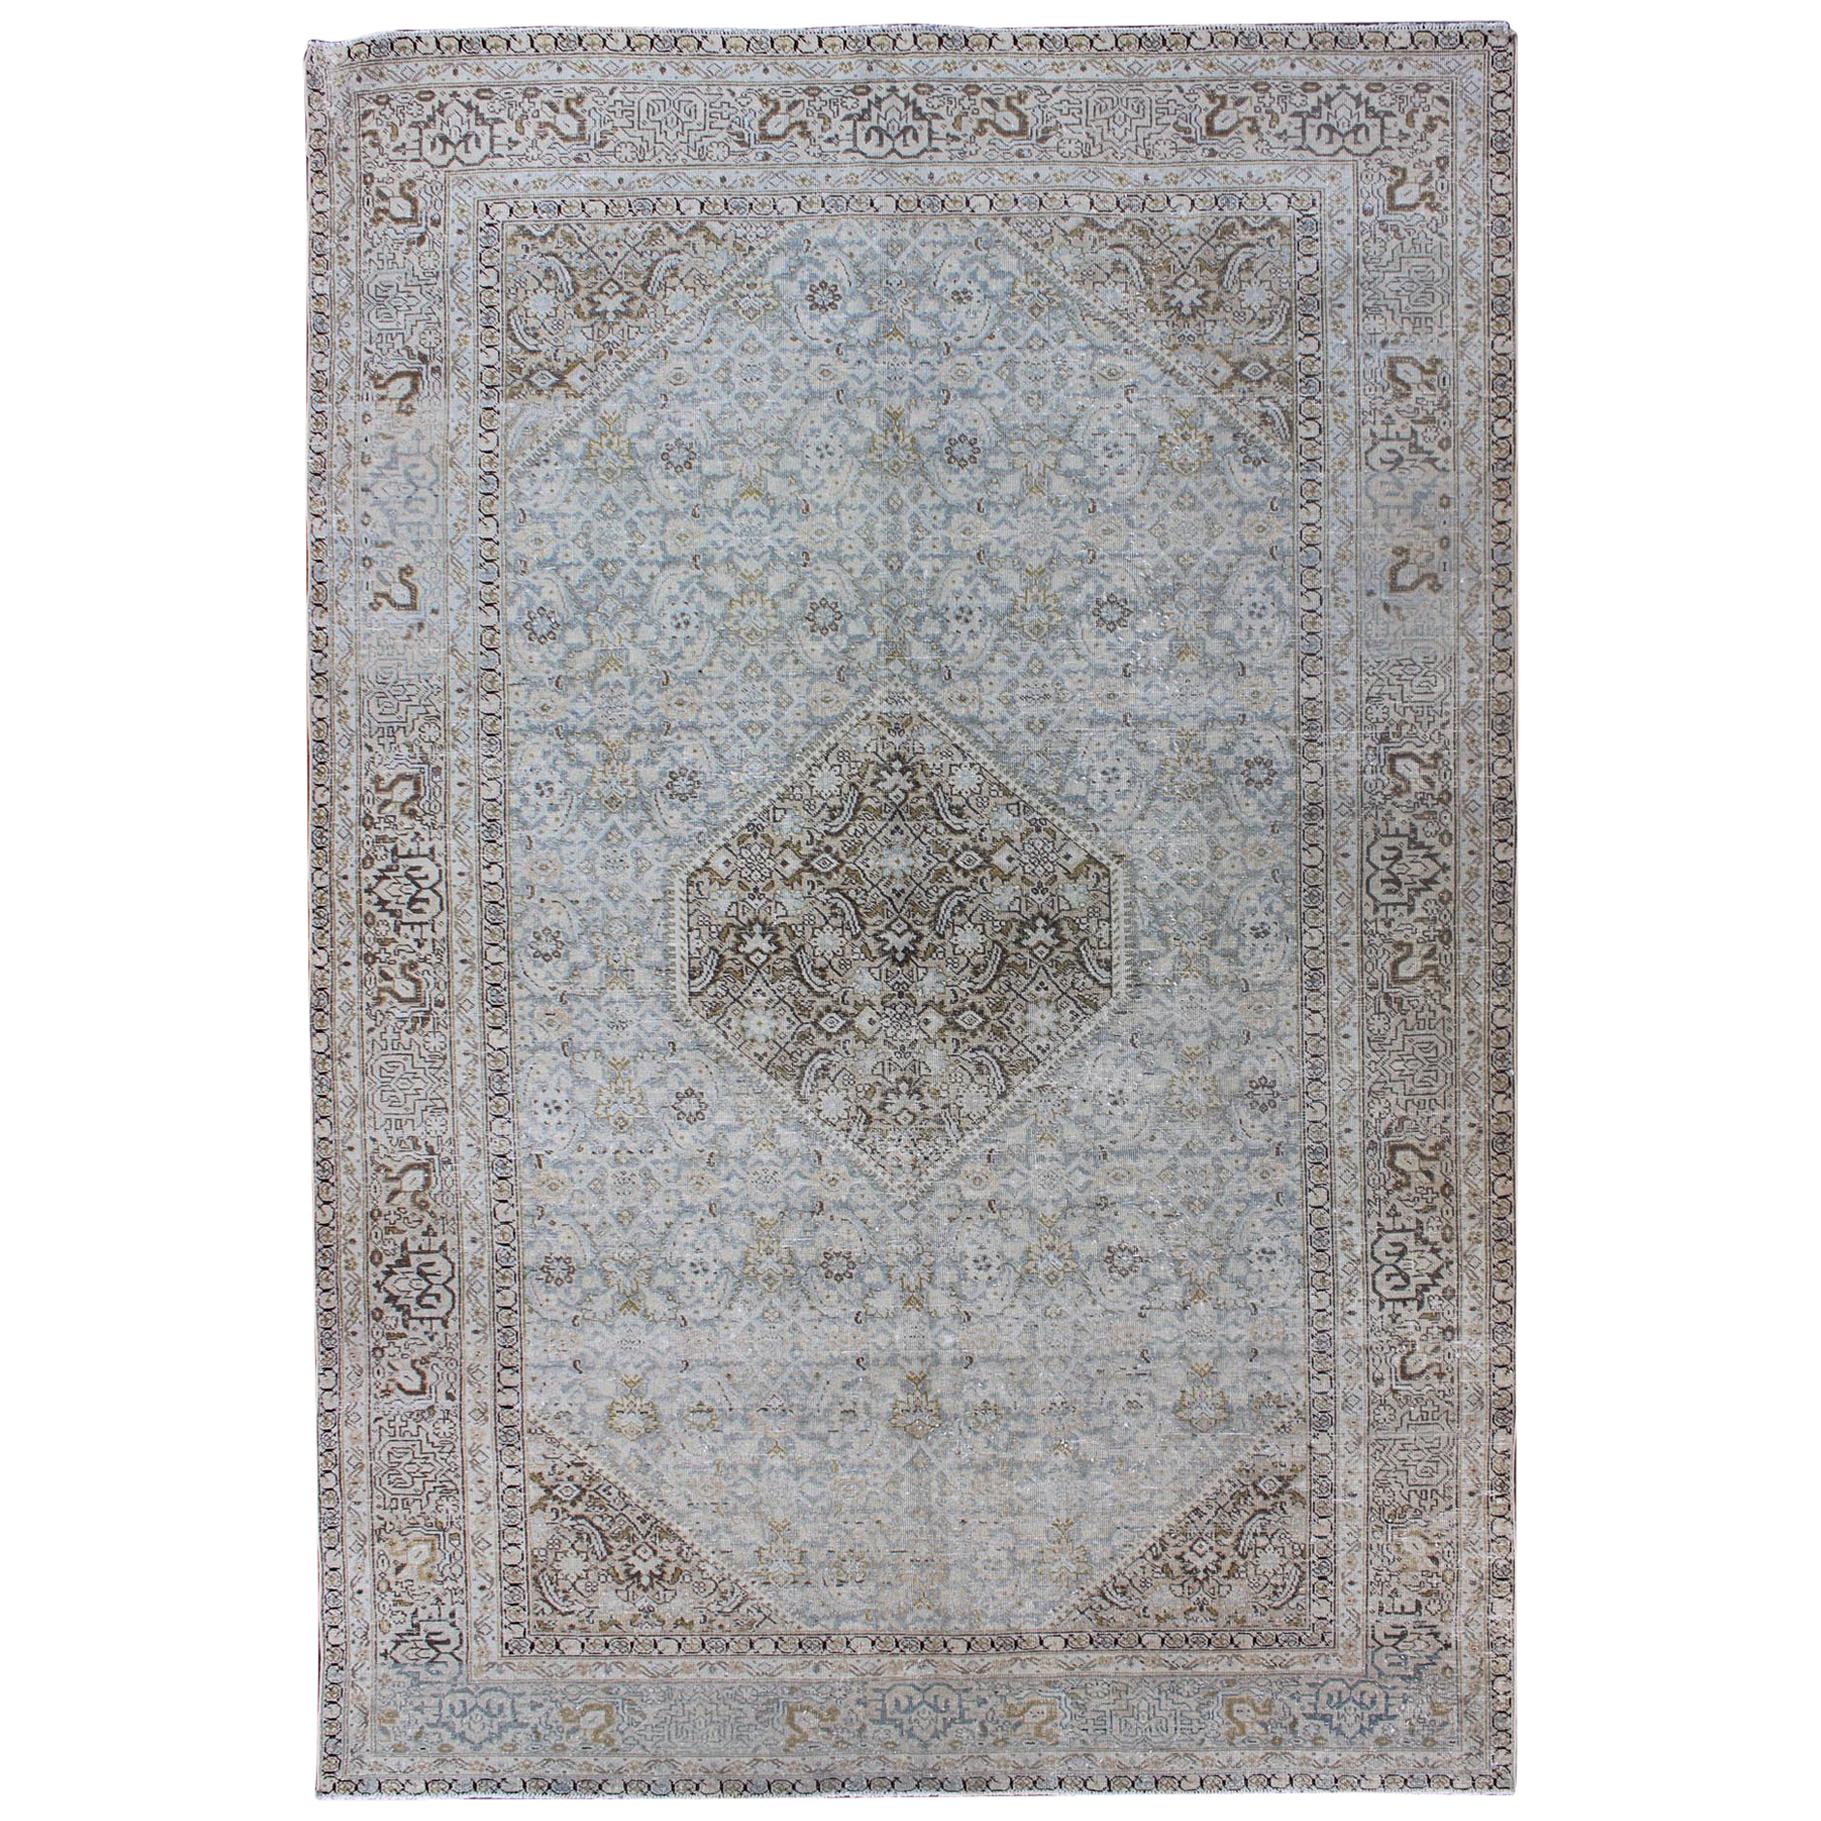 Antique Persian Tabriz Rug with Medallion in Light Blue, Tan and Brown Colors